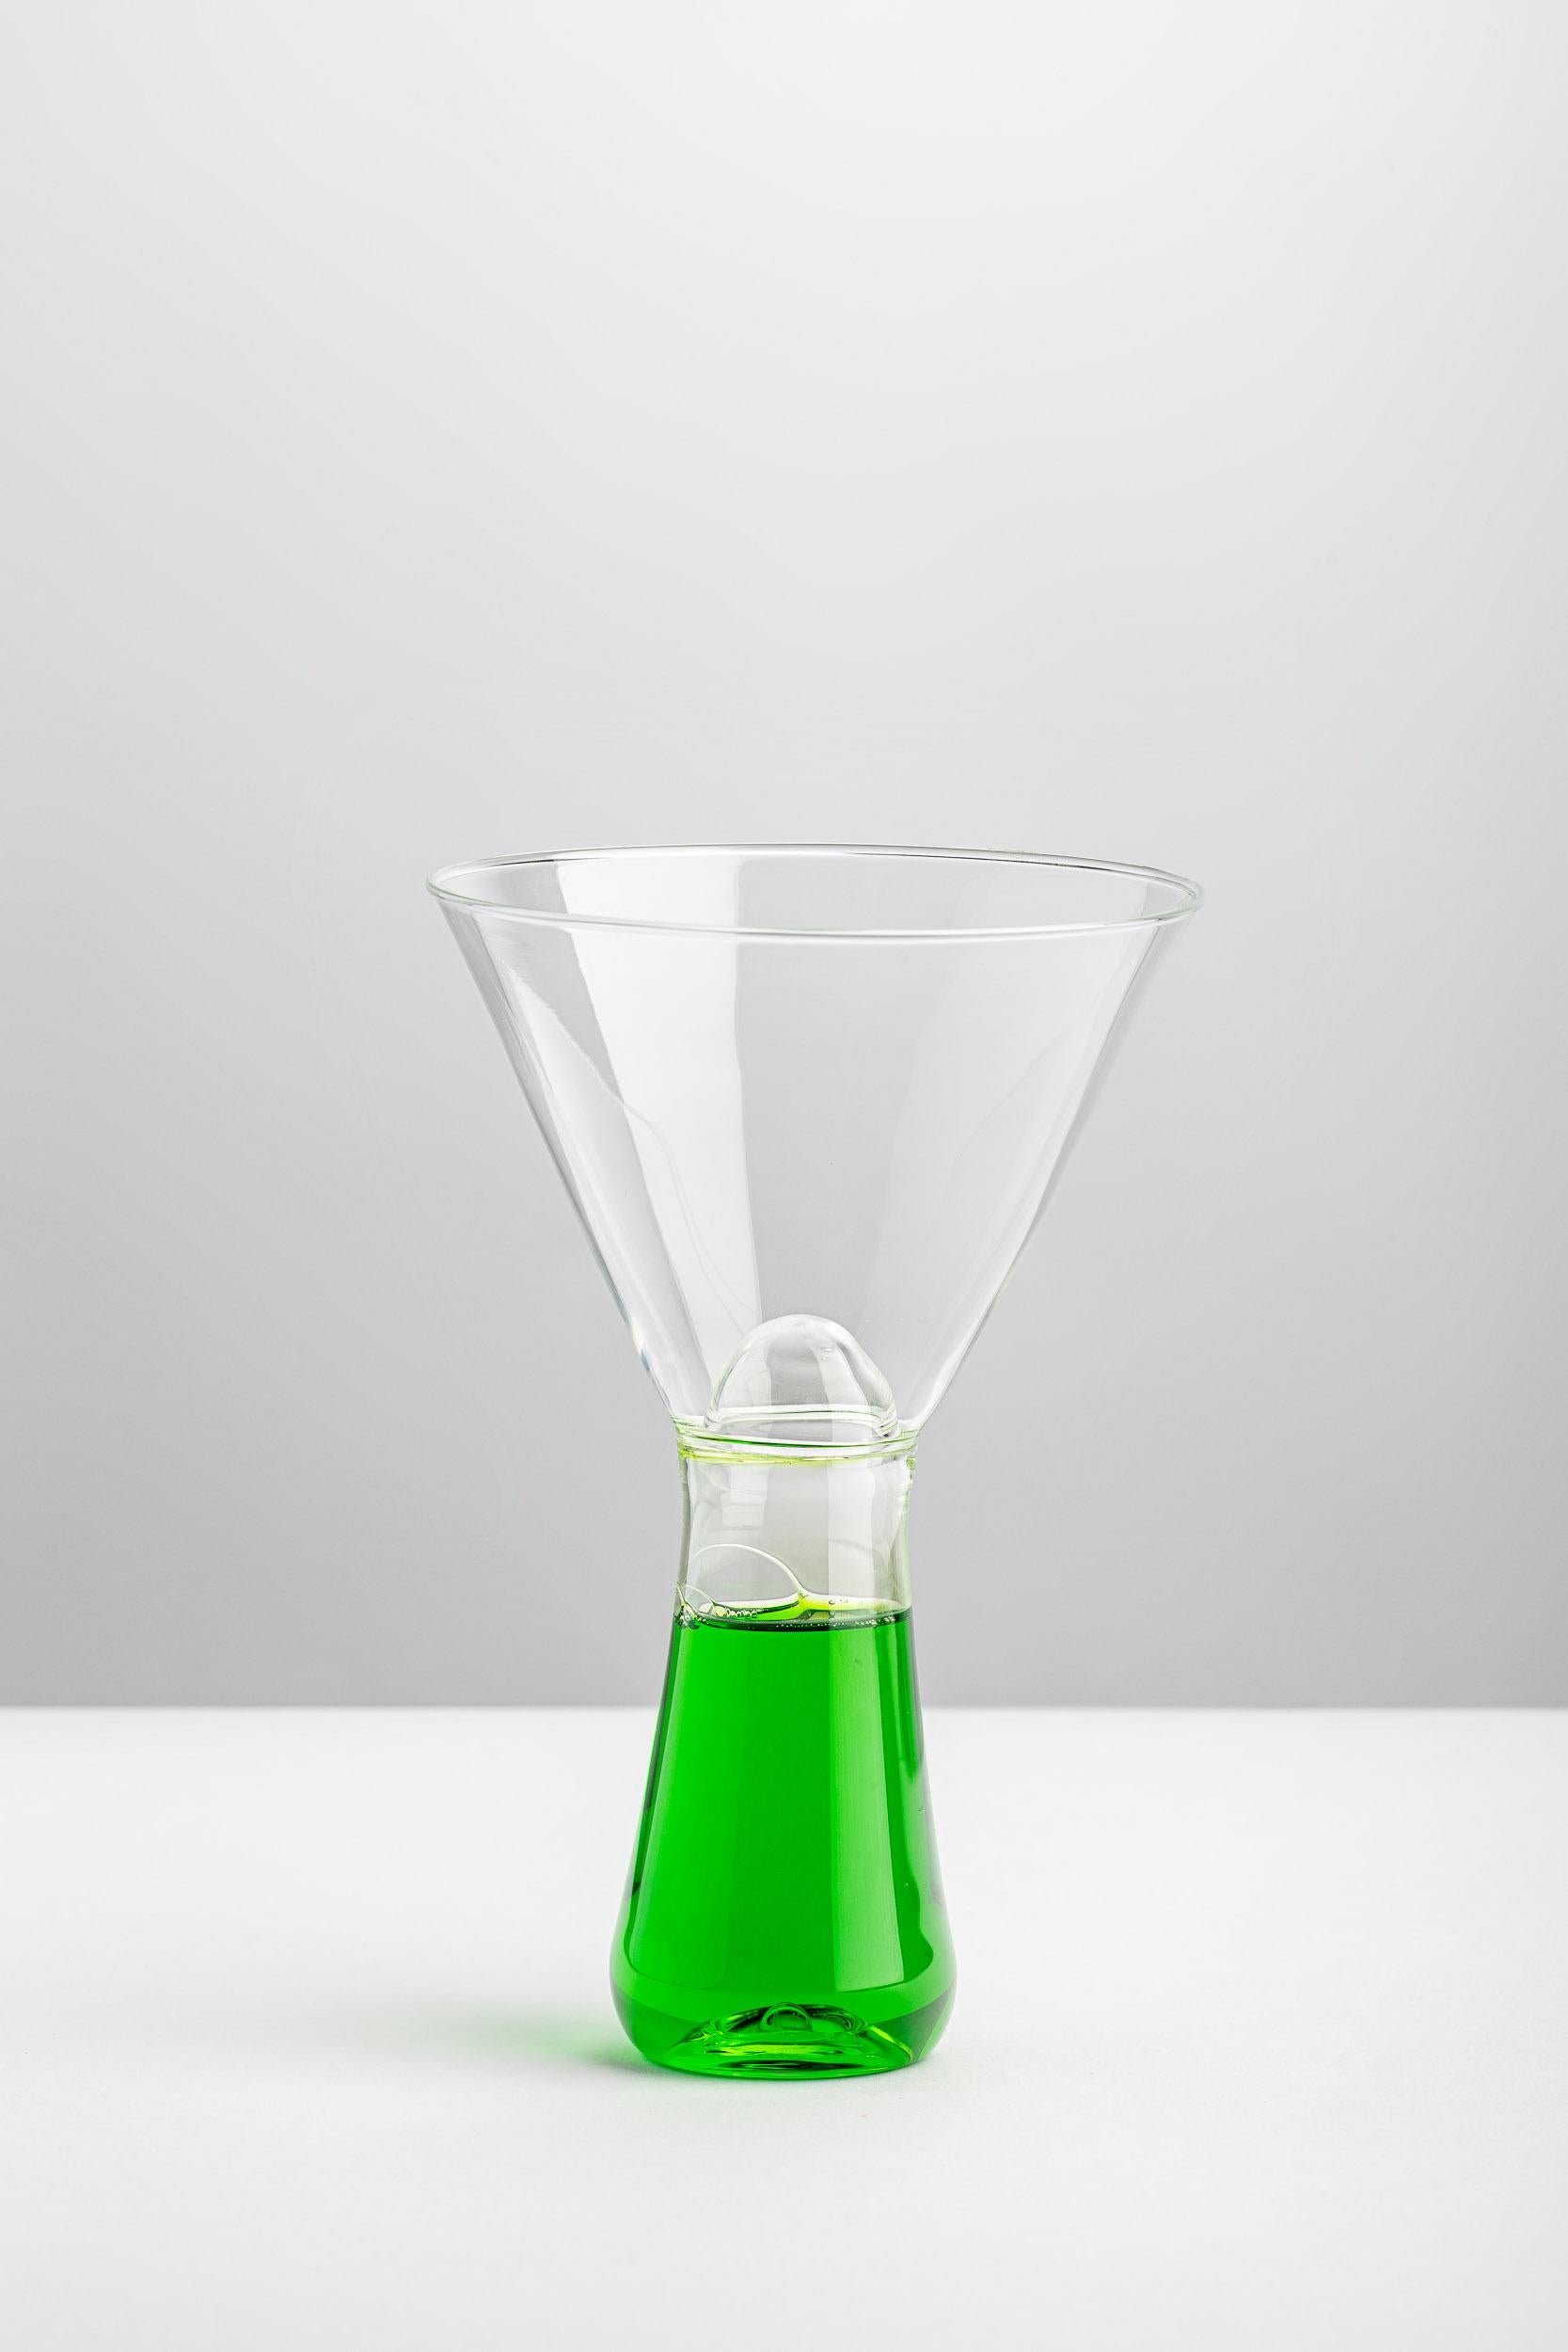 The conical stem filled with colored detergent seems to invade the chalice cup at every sip of our aperitif. Sculpturally beautiful, VELENI’s Martini Glass MG-30g plays on the dichotomy between attraction and repulsion: every time we have a drink we